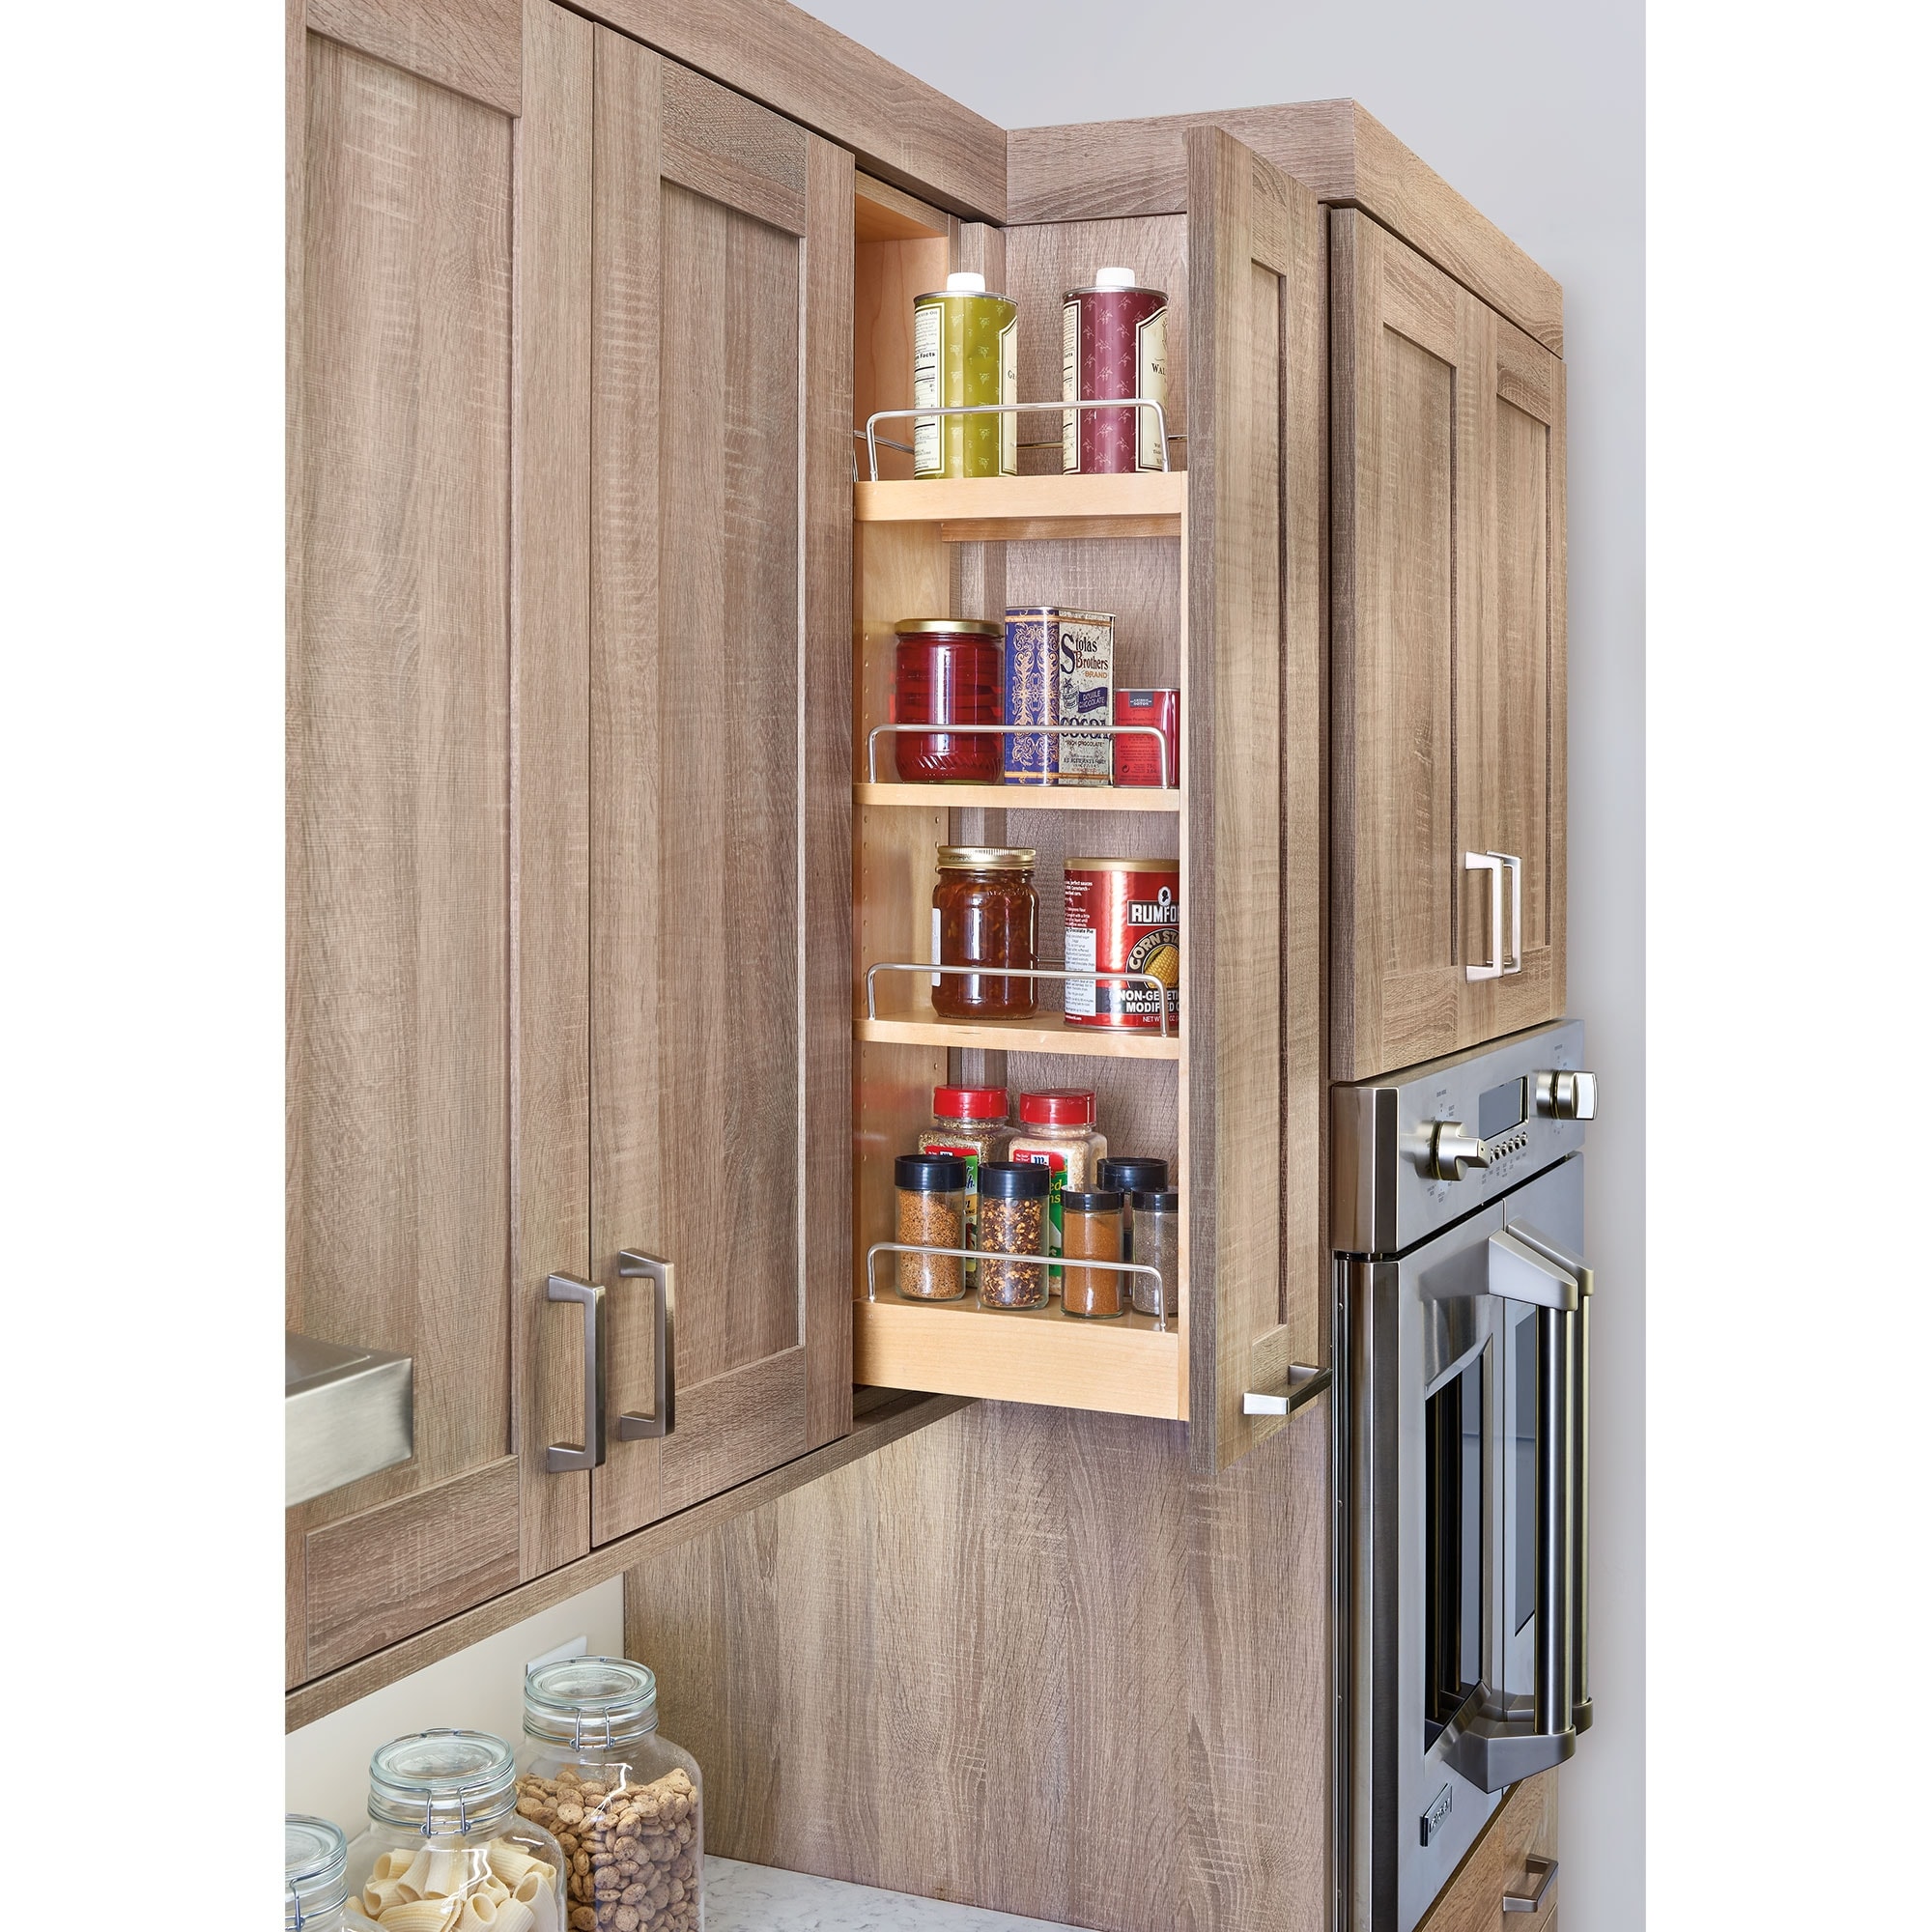 https://ak1.ostkcdn.com/images/products/is/images/direct/d42f0bb82203da39d731b6b69ebe46be4e57dc82/Rev-A-Shelf-Wooden-Wall-Cabinet-Pull-Out-Organizer-for-Kitchen-with-Soft-Close.jpg